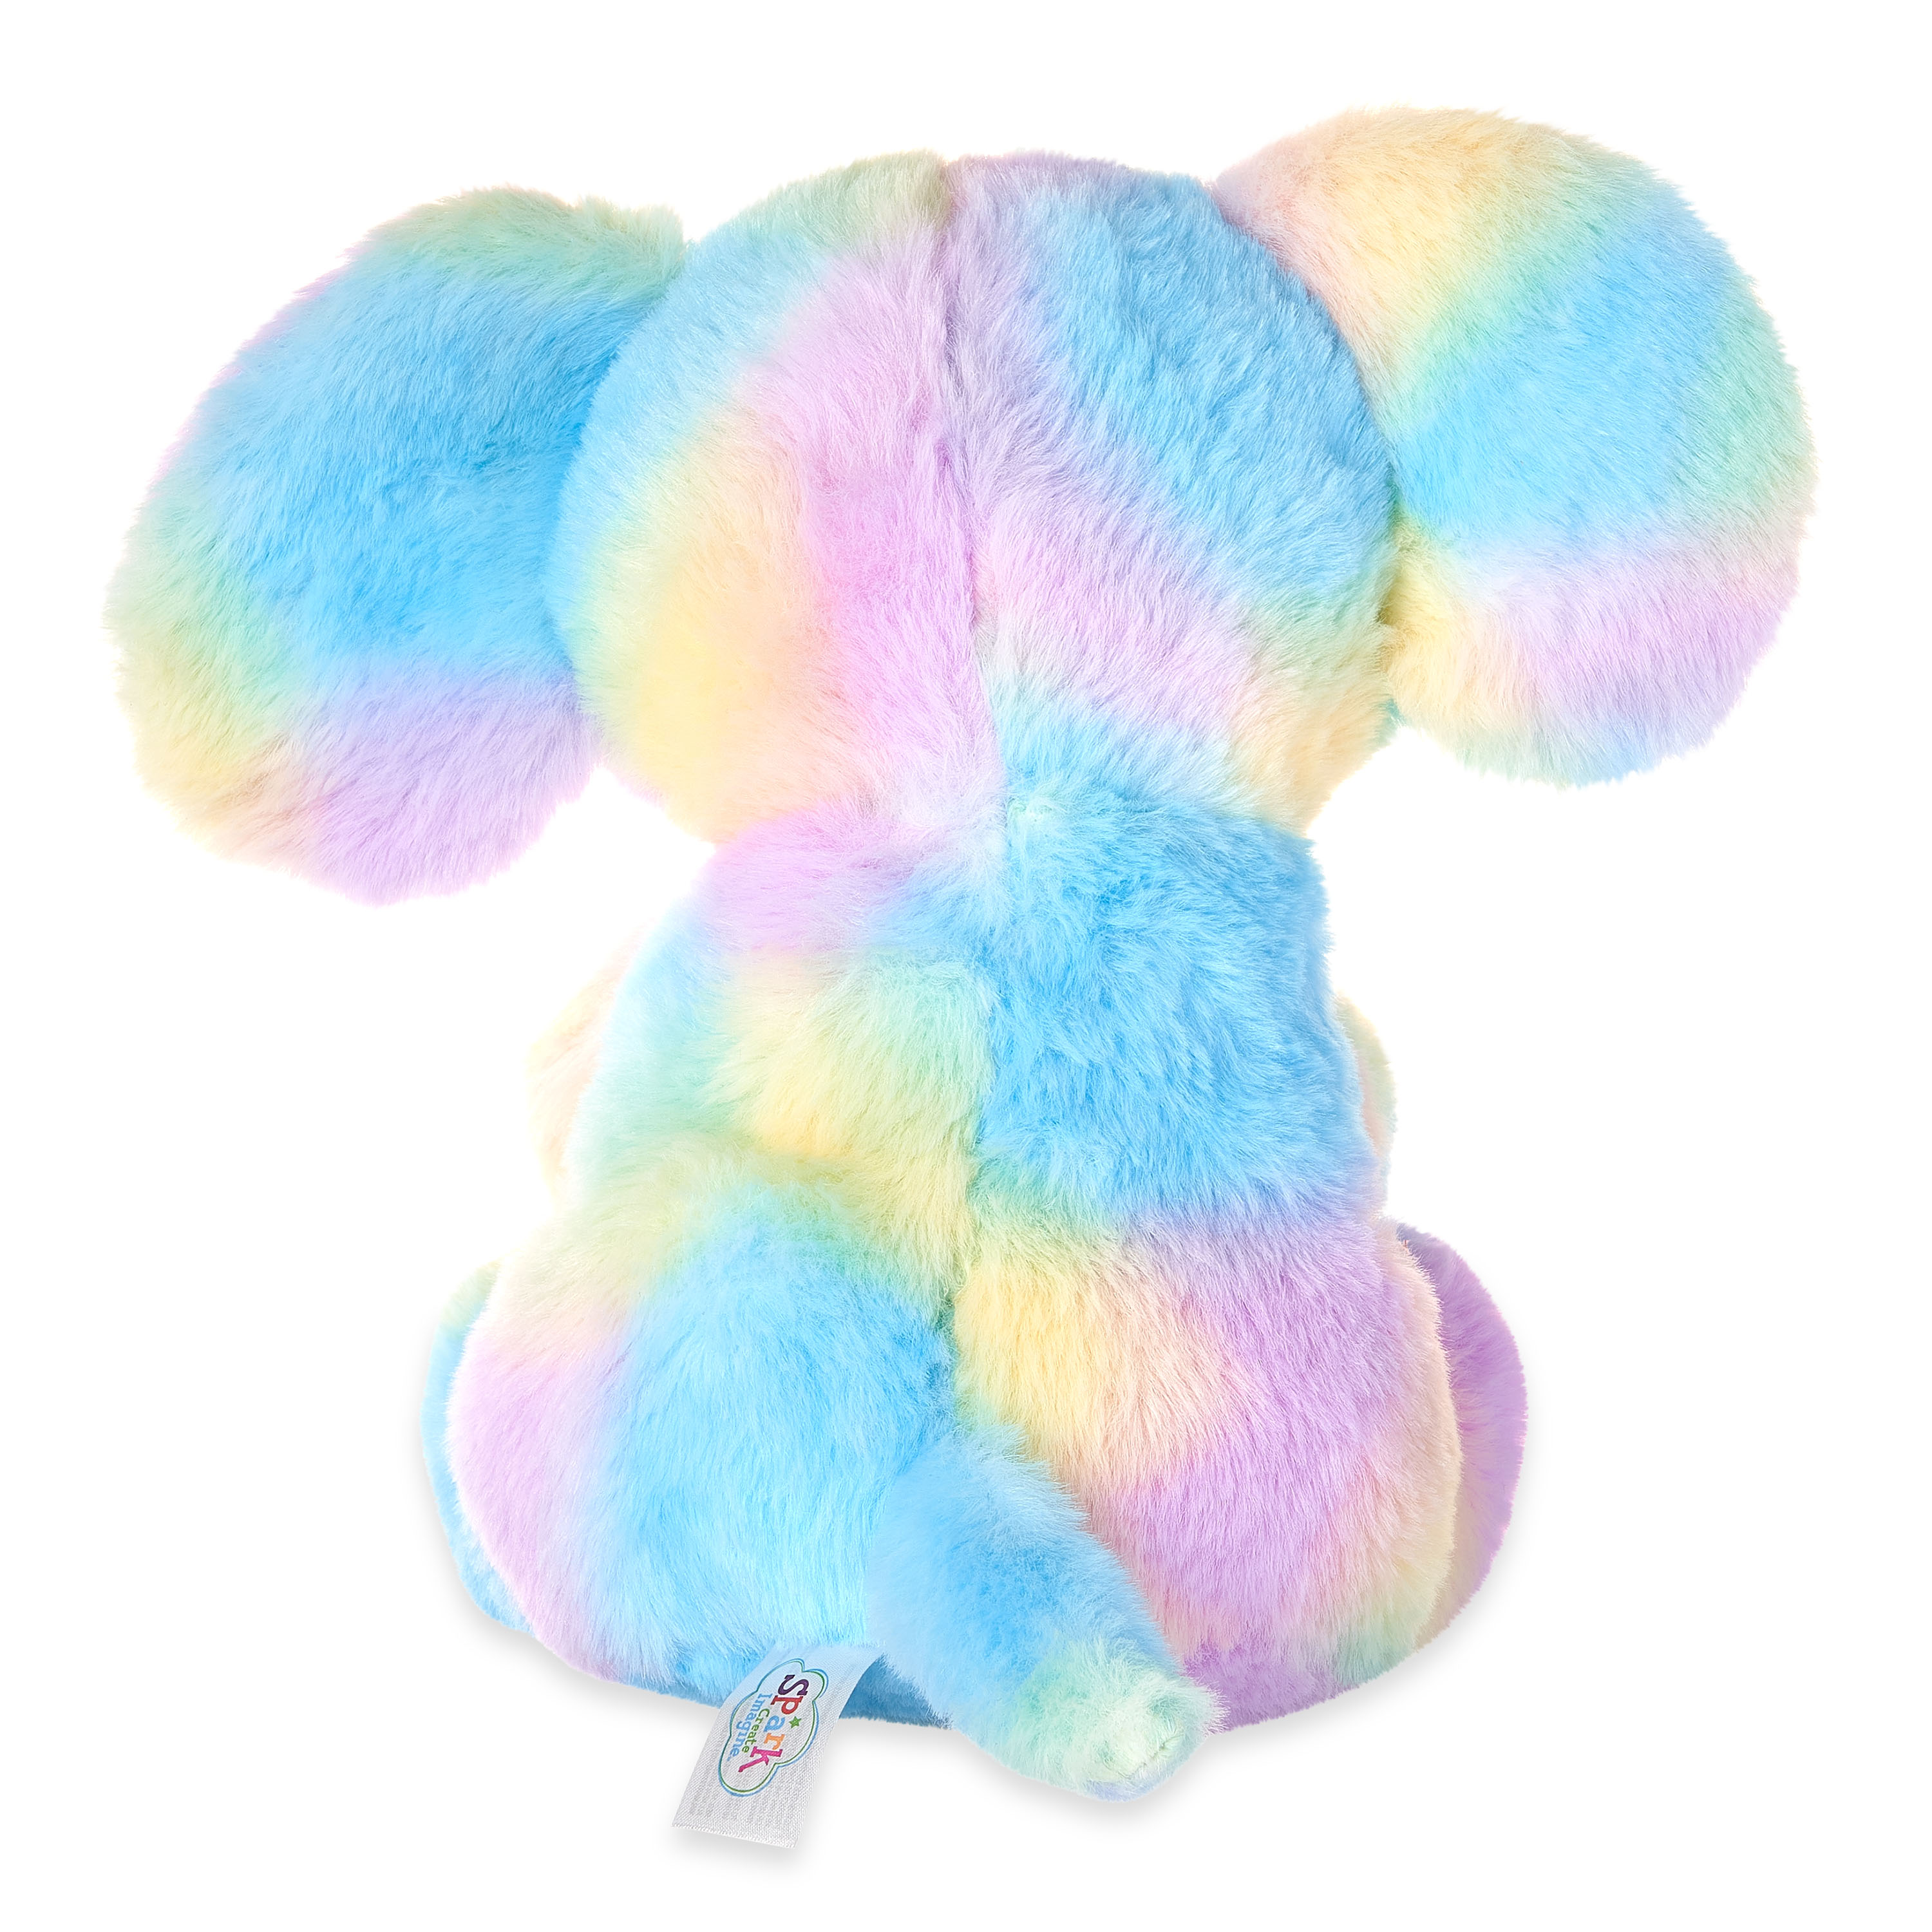 Spark Create Imagine Tie Dye Elephant Plush Toy, for All Ages - image 5 of 7